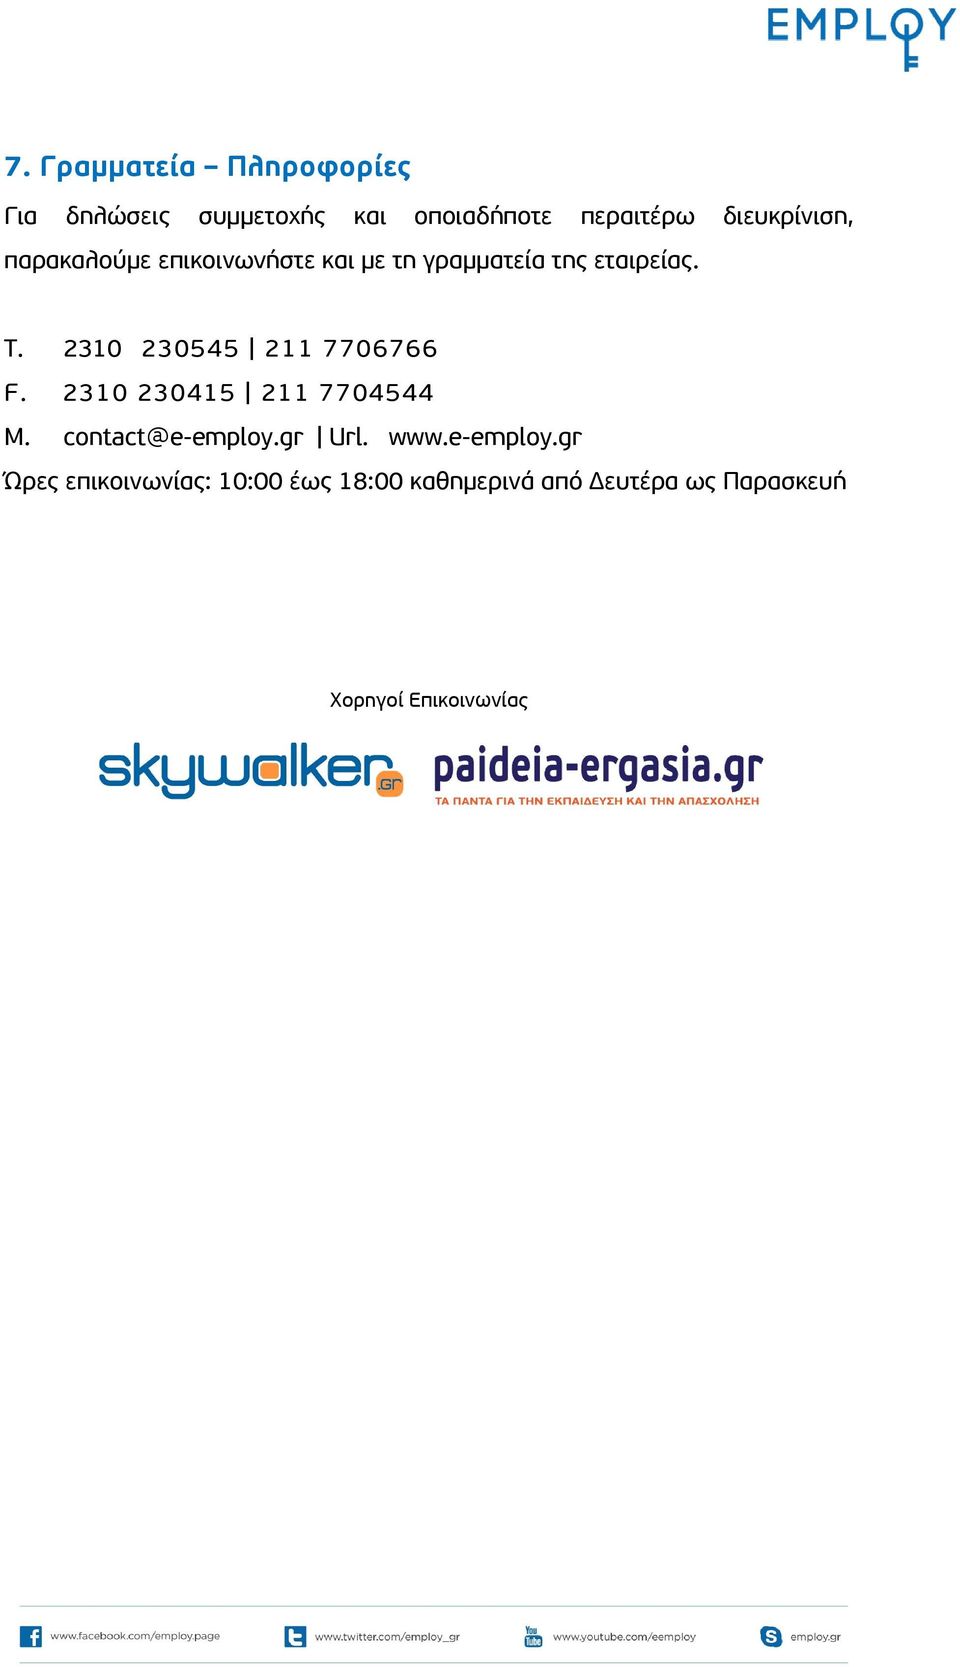 2310 230545 211 7706766 F. 2310 230415 211 7704544 M. contact@e-employ.gr Url. www.